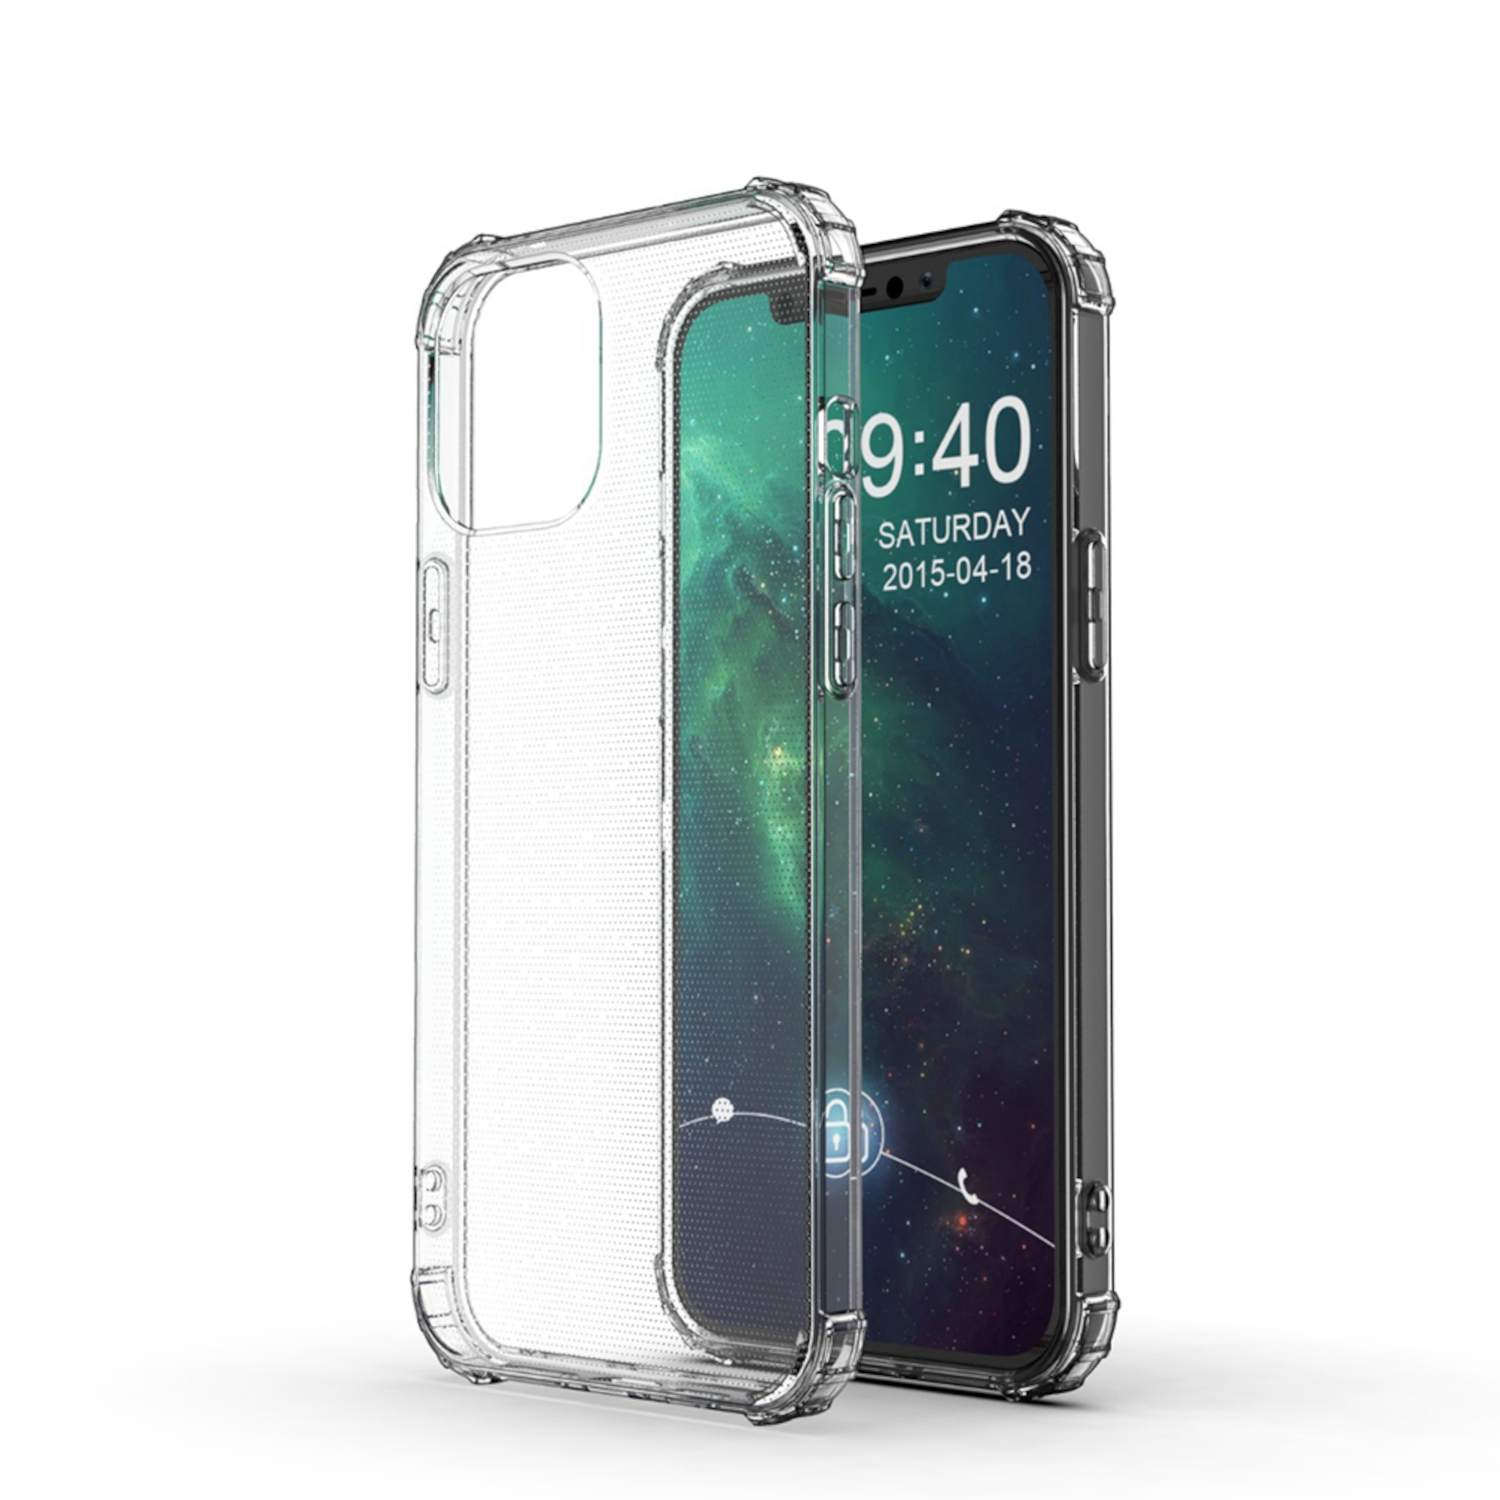 1.5 Shock 5G, Backcover, Case, Transparent JAMCOVER mm Samsung, Anti Galaxy A32